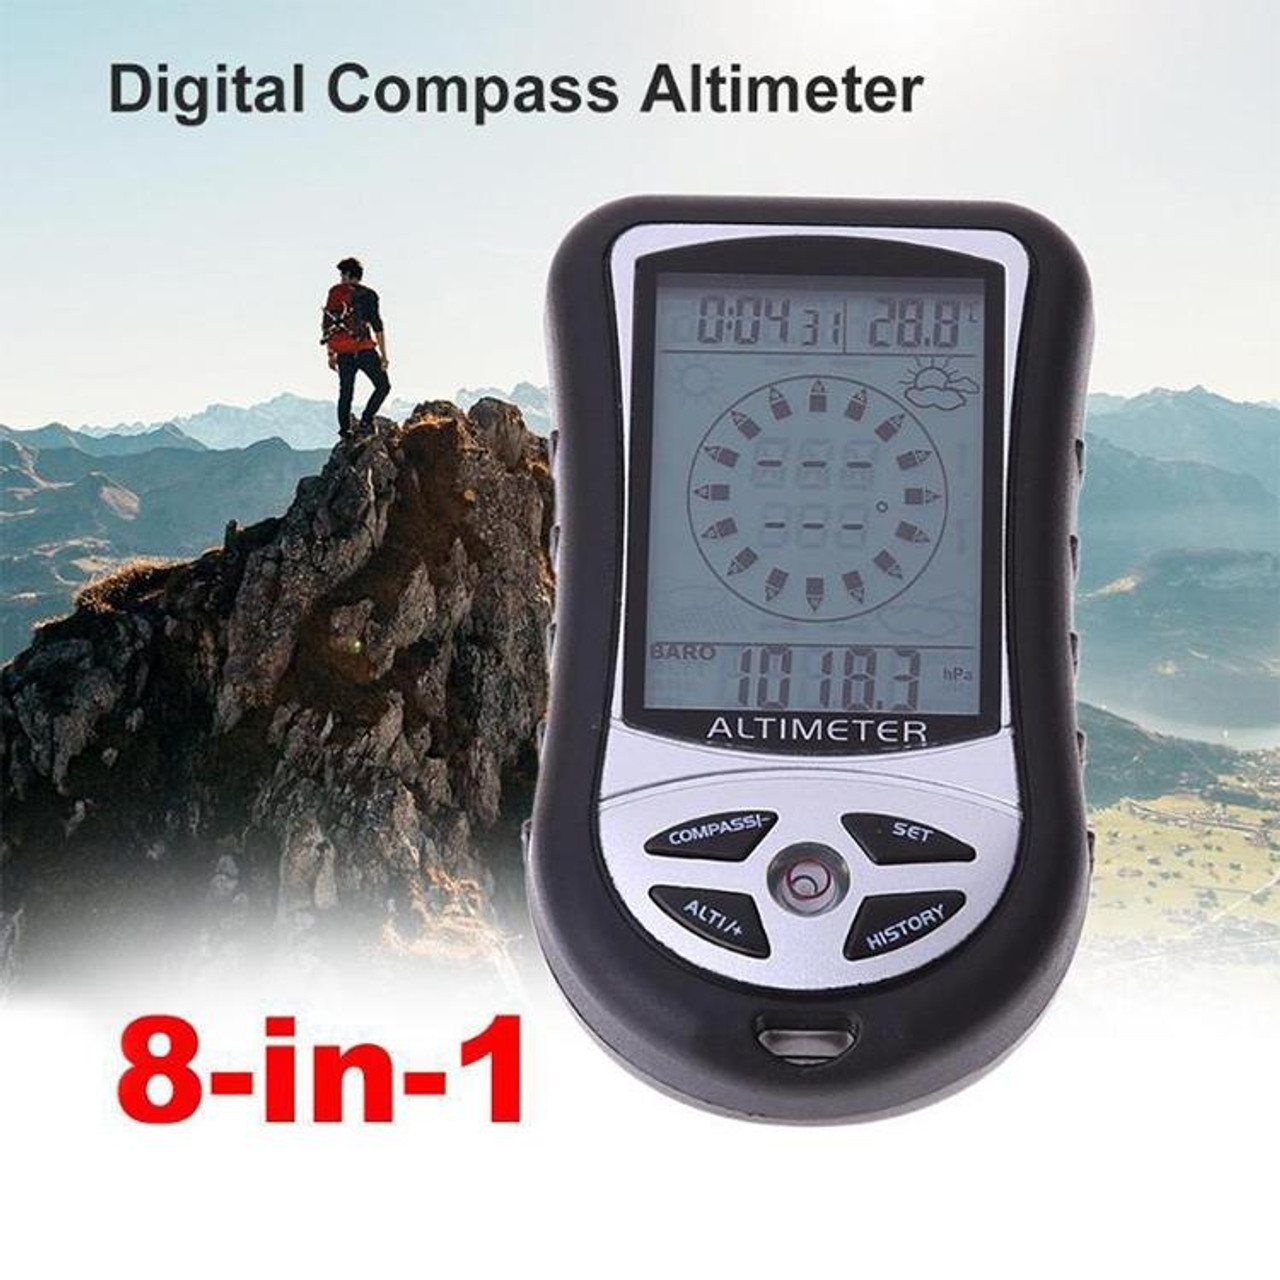 Multifunction Handheld Electronic Thermometer Compass With Calendar For  Outdoor Camping Picnic